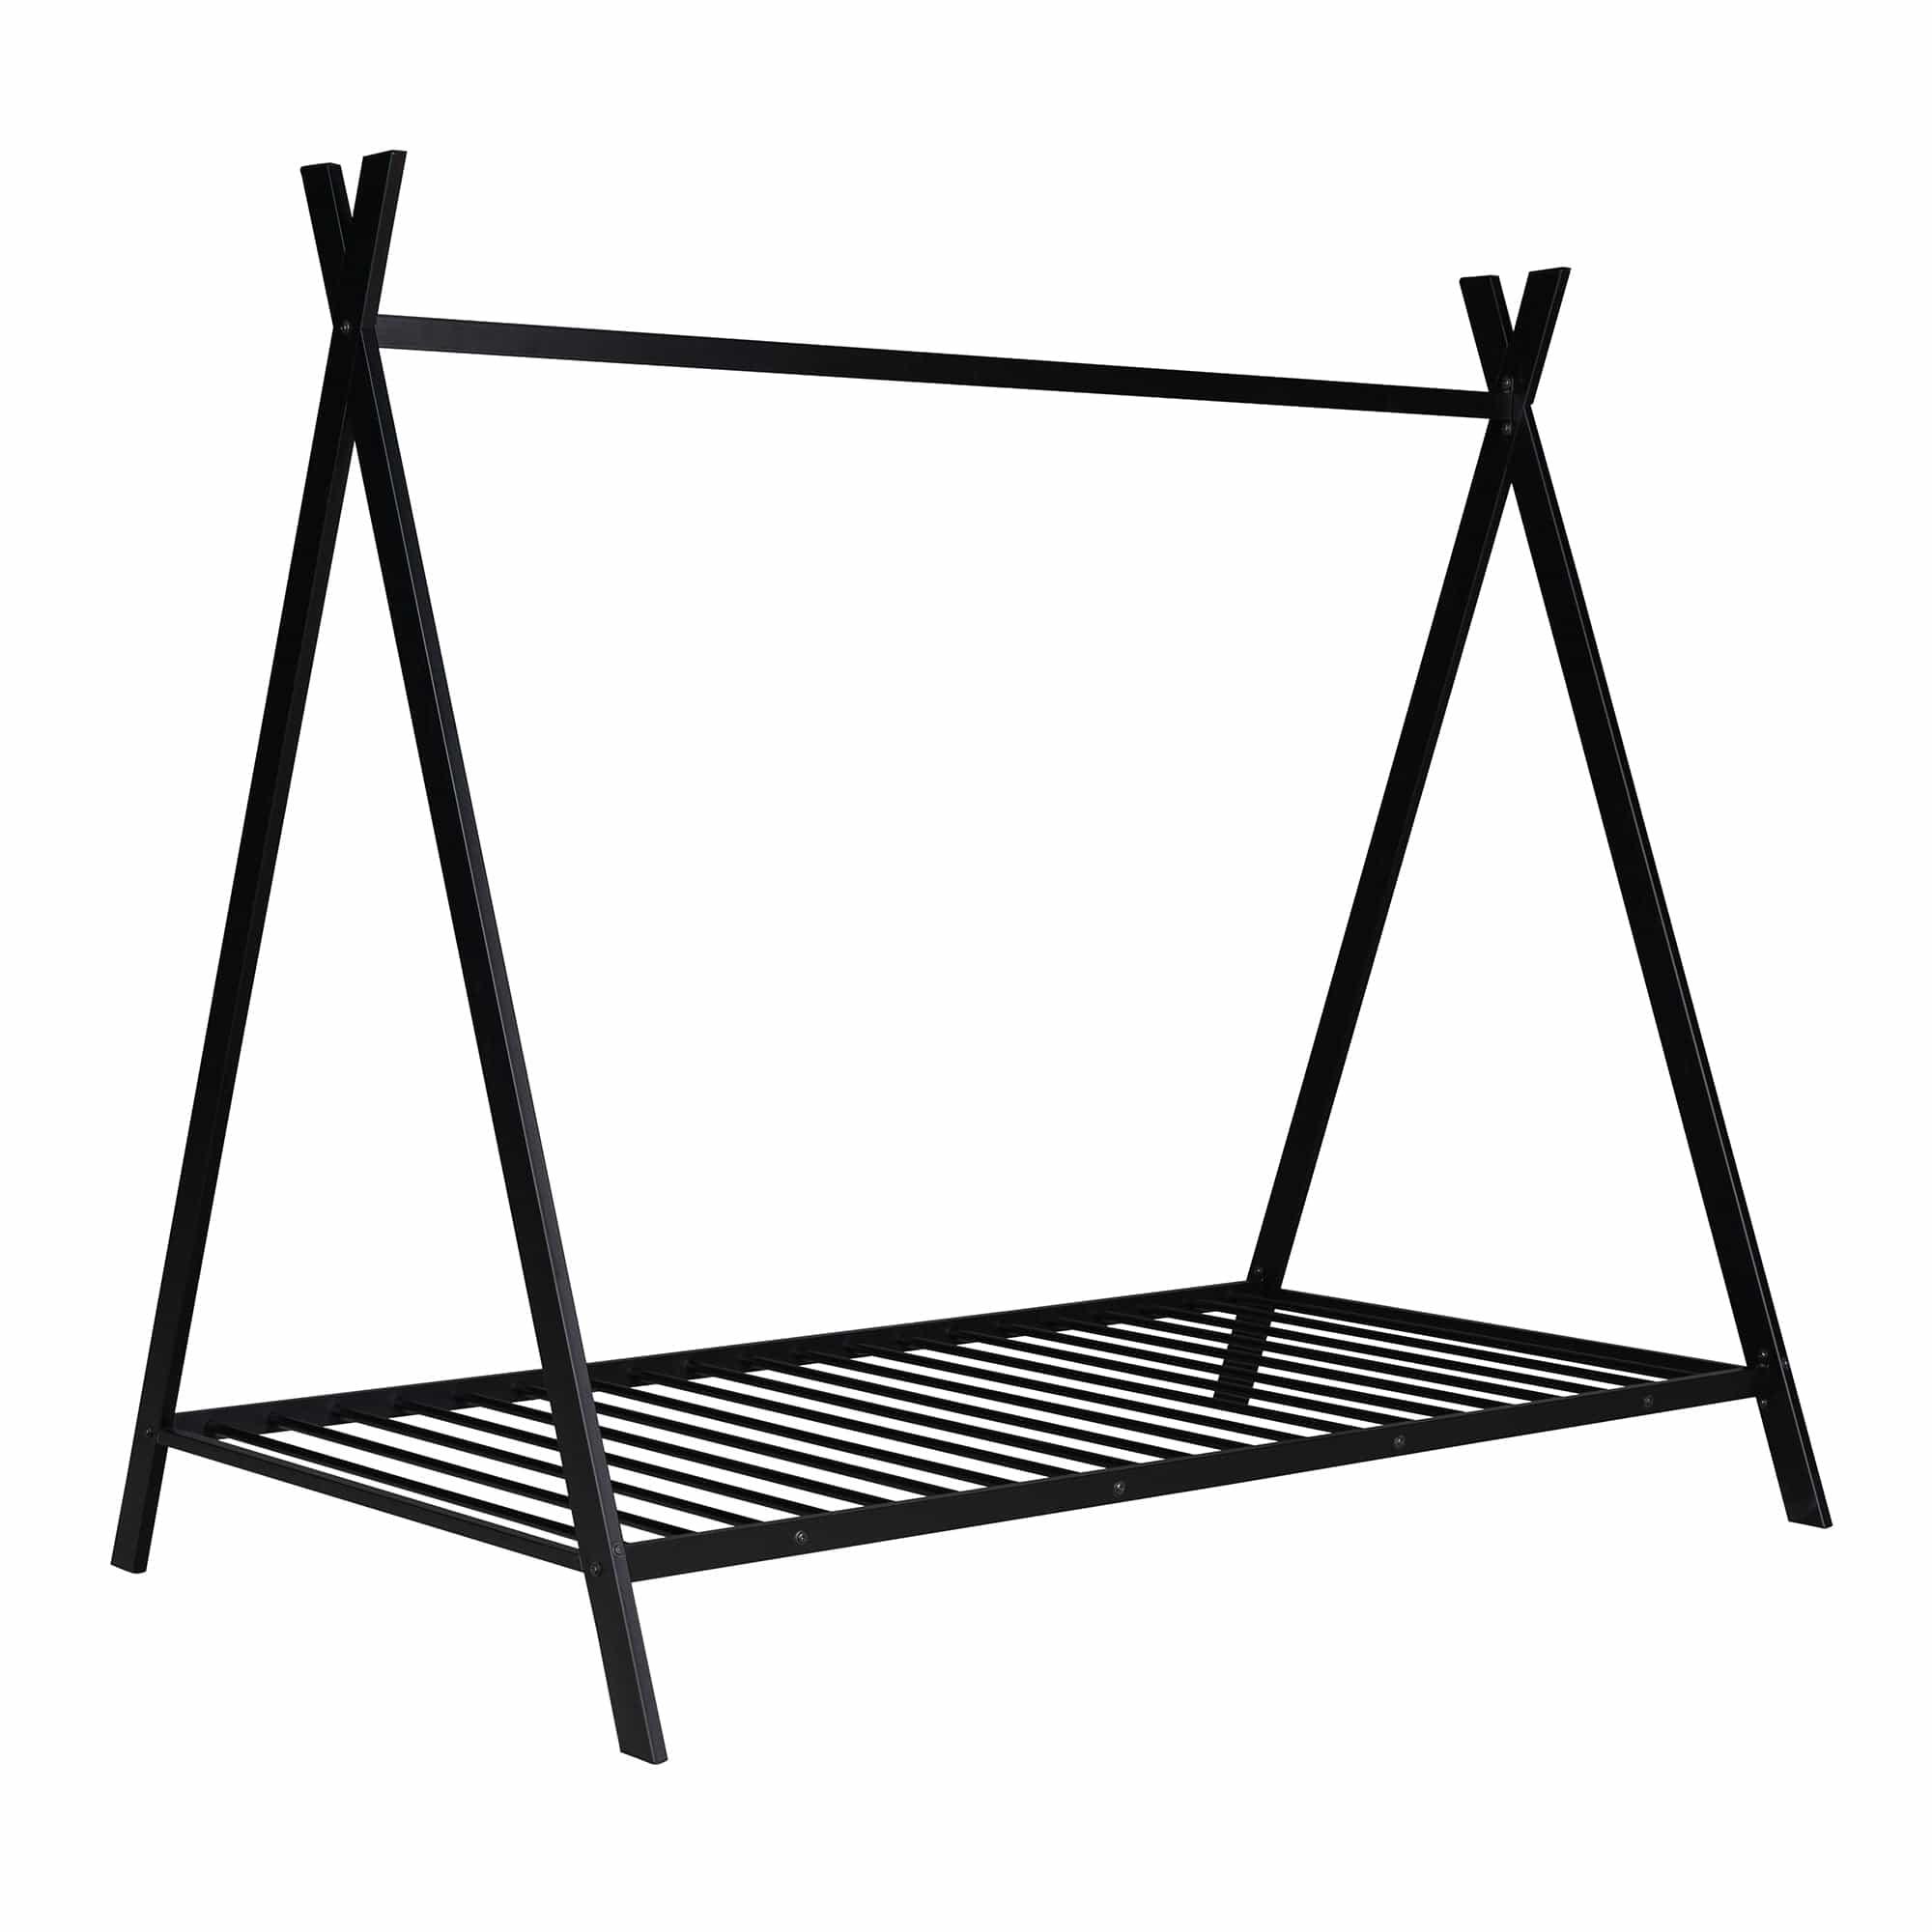 Shop House Bed Tent Bed Frame Twin Size Metal Floor Play House Bed with Slat for Kids Girls Boys , No Box Spring Needed Black Mademoiselle Home Decor